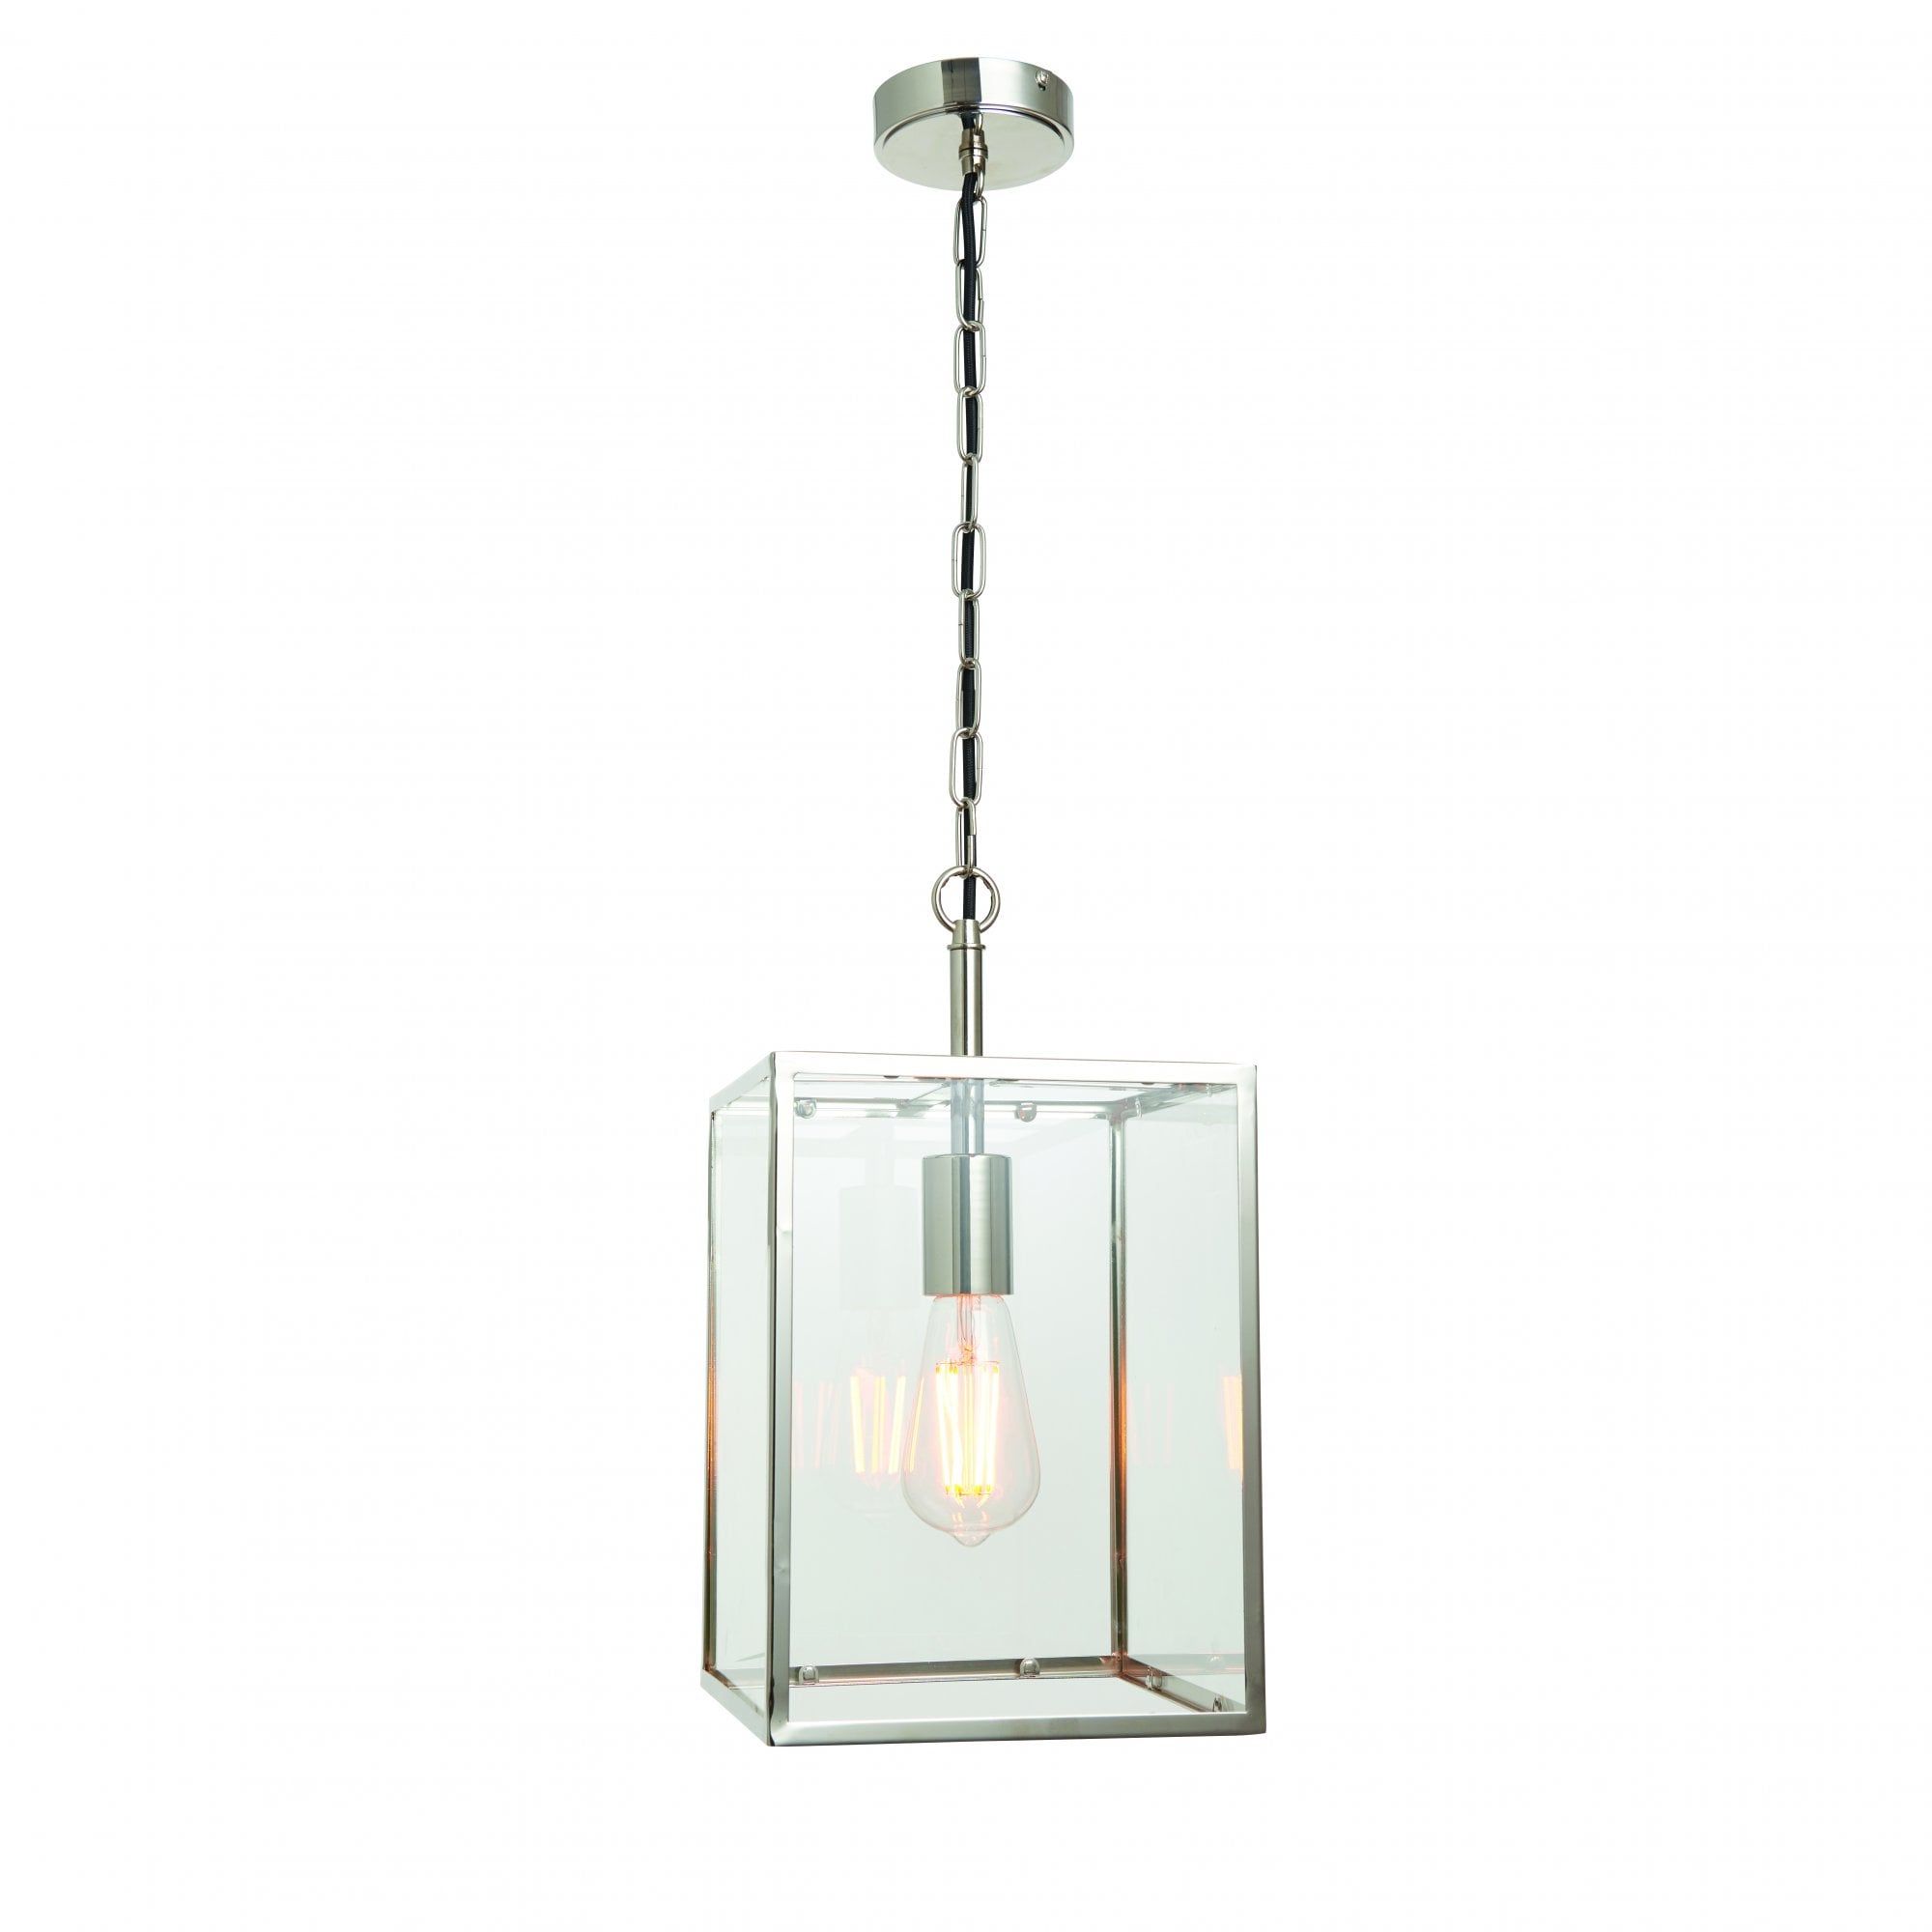 Pendant 40w Bright Nickel Plate & Clear Glass Regarding Lantern Chandeliers With Transparent Glass (View 2 of 15)